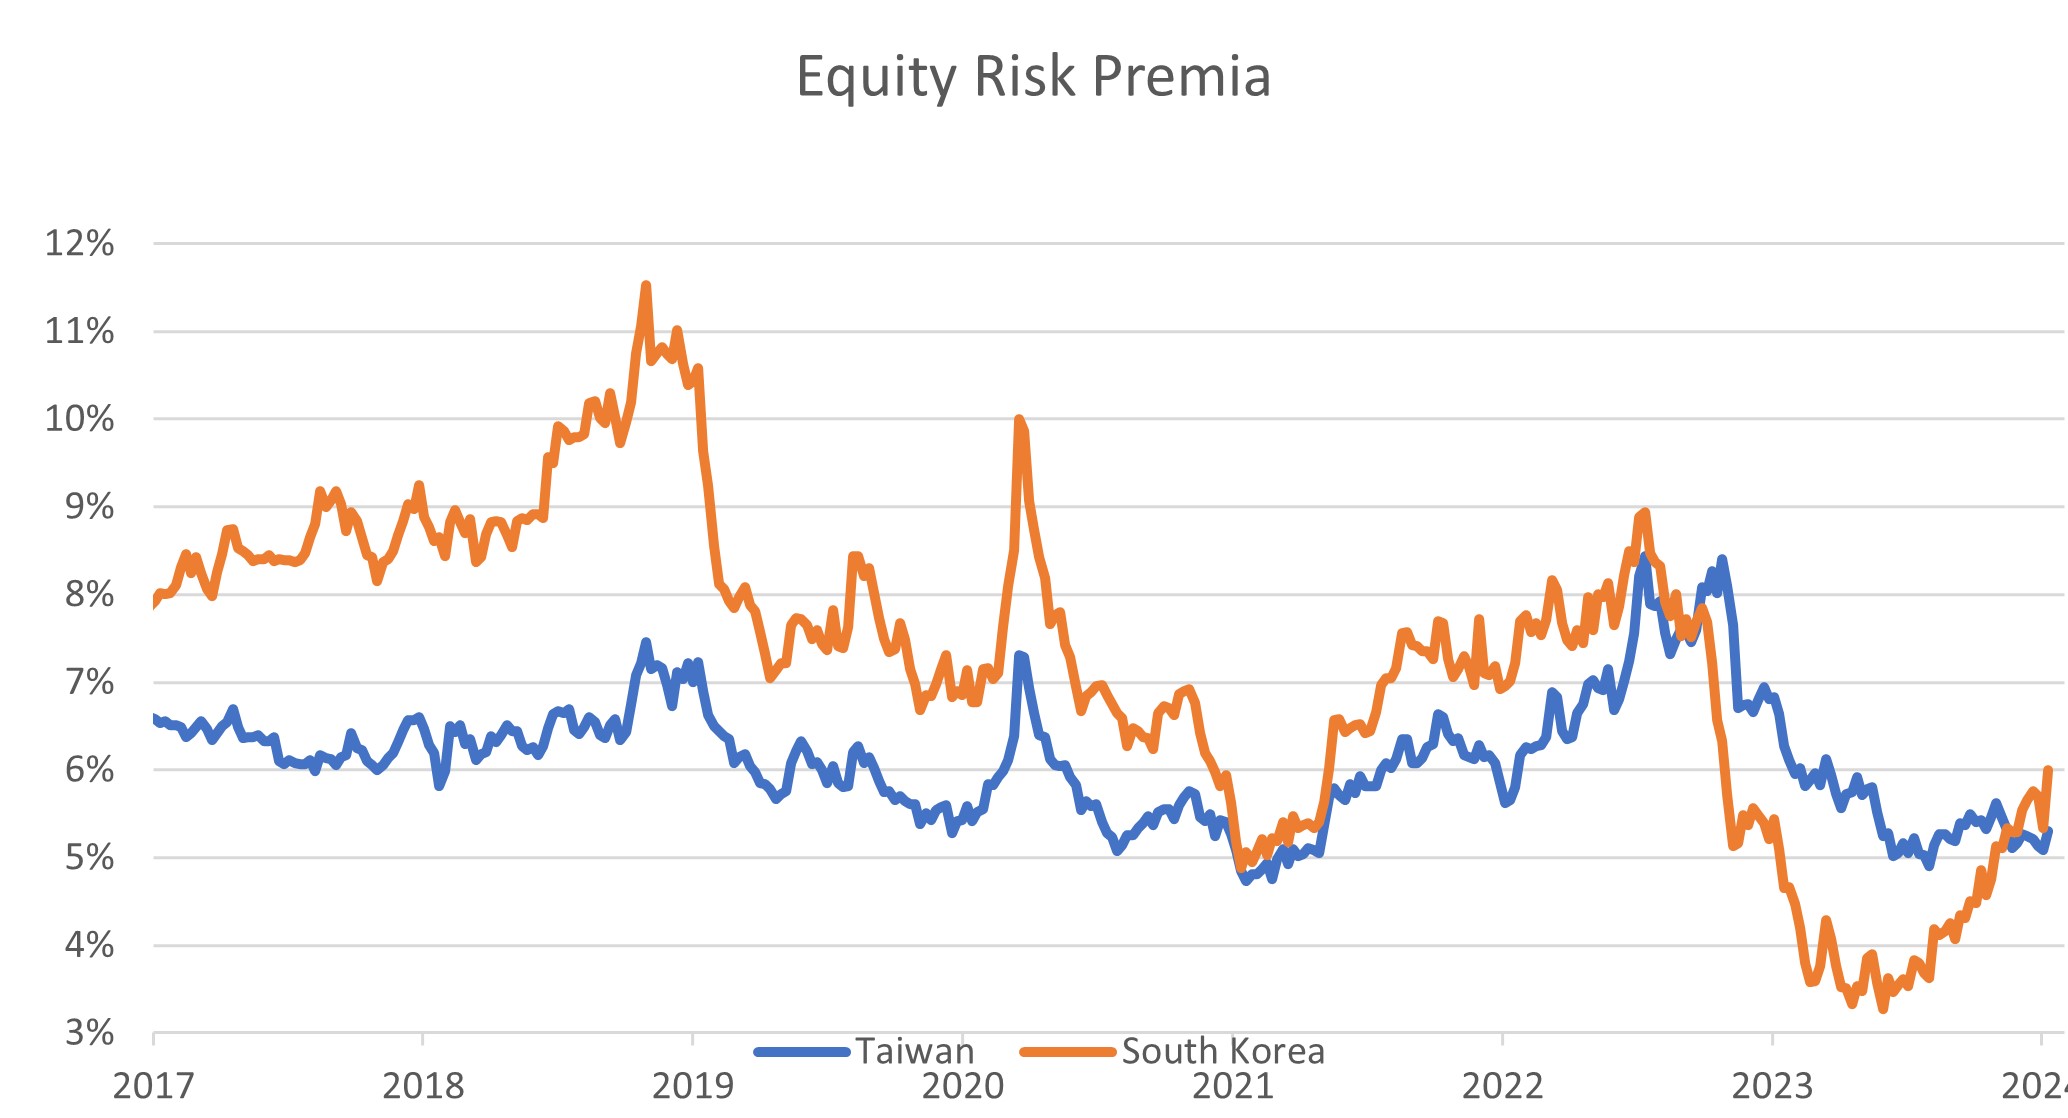 Equity risk premia